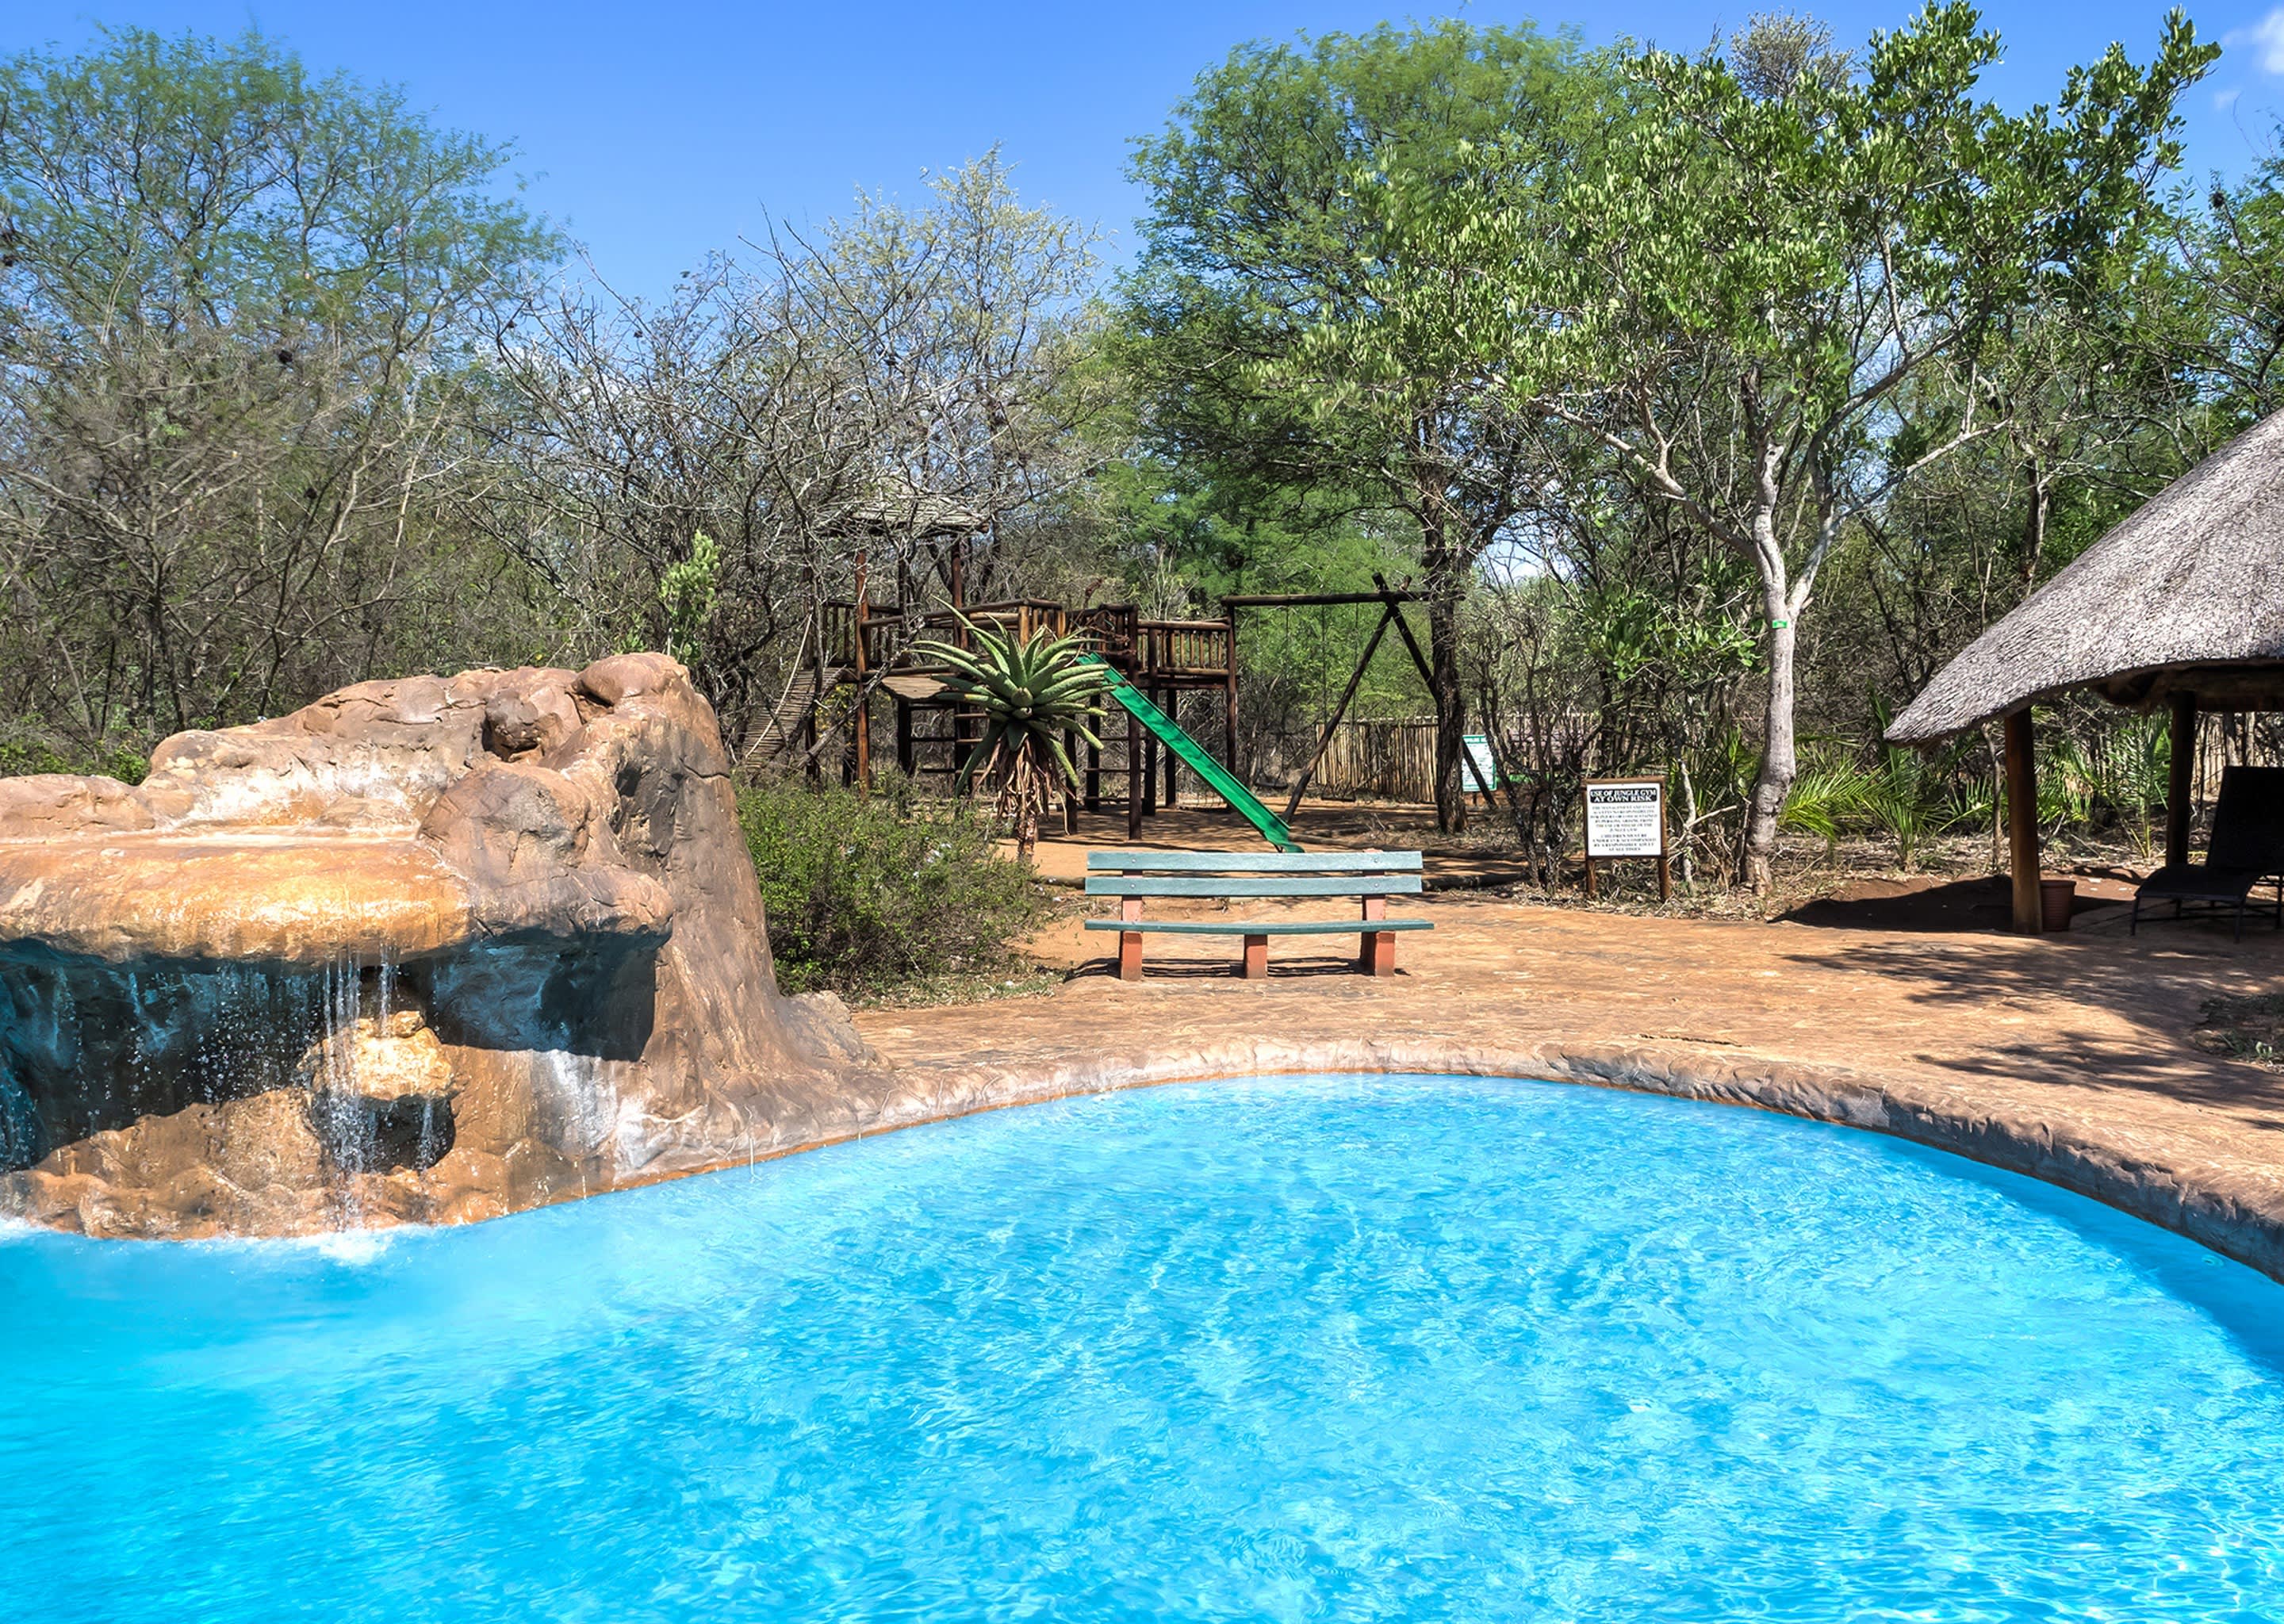 Jackalberry Ridge, Marloth Park near The KNP: Midweek / Weekend Self-Catering Stays for 4/6 people in a Safari Tent!